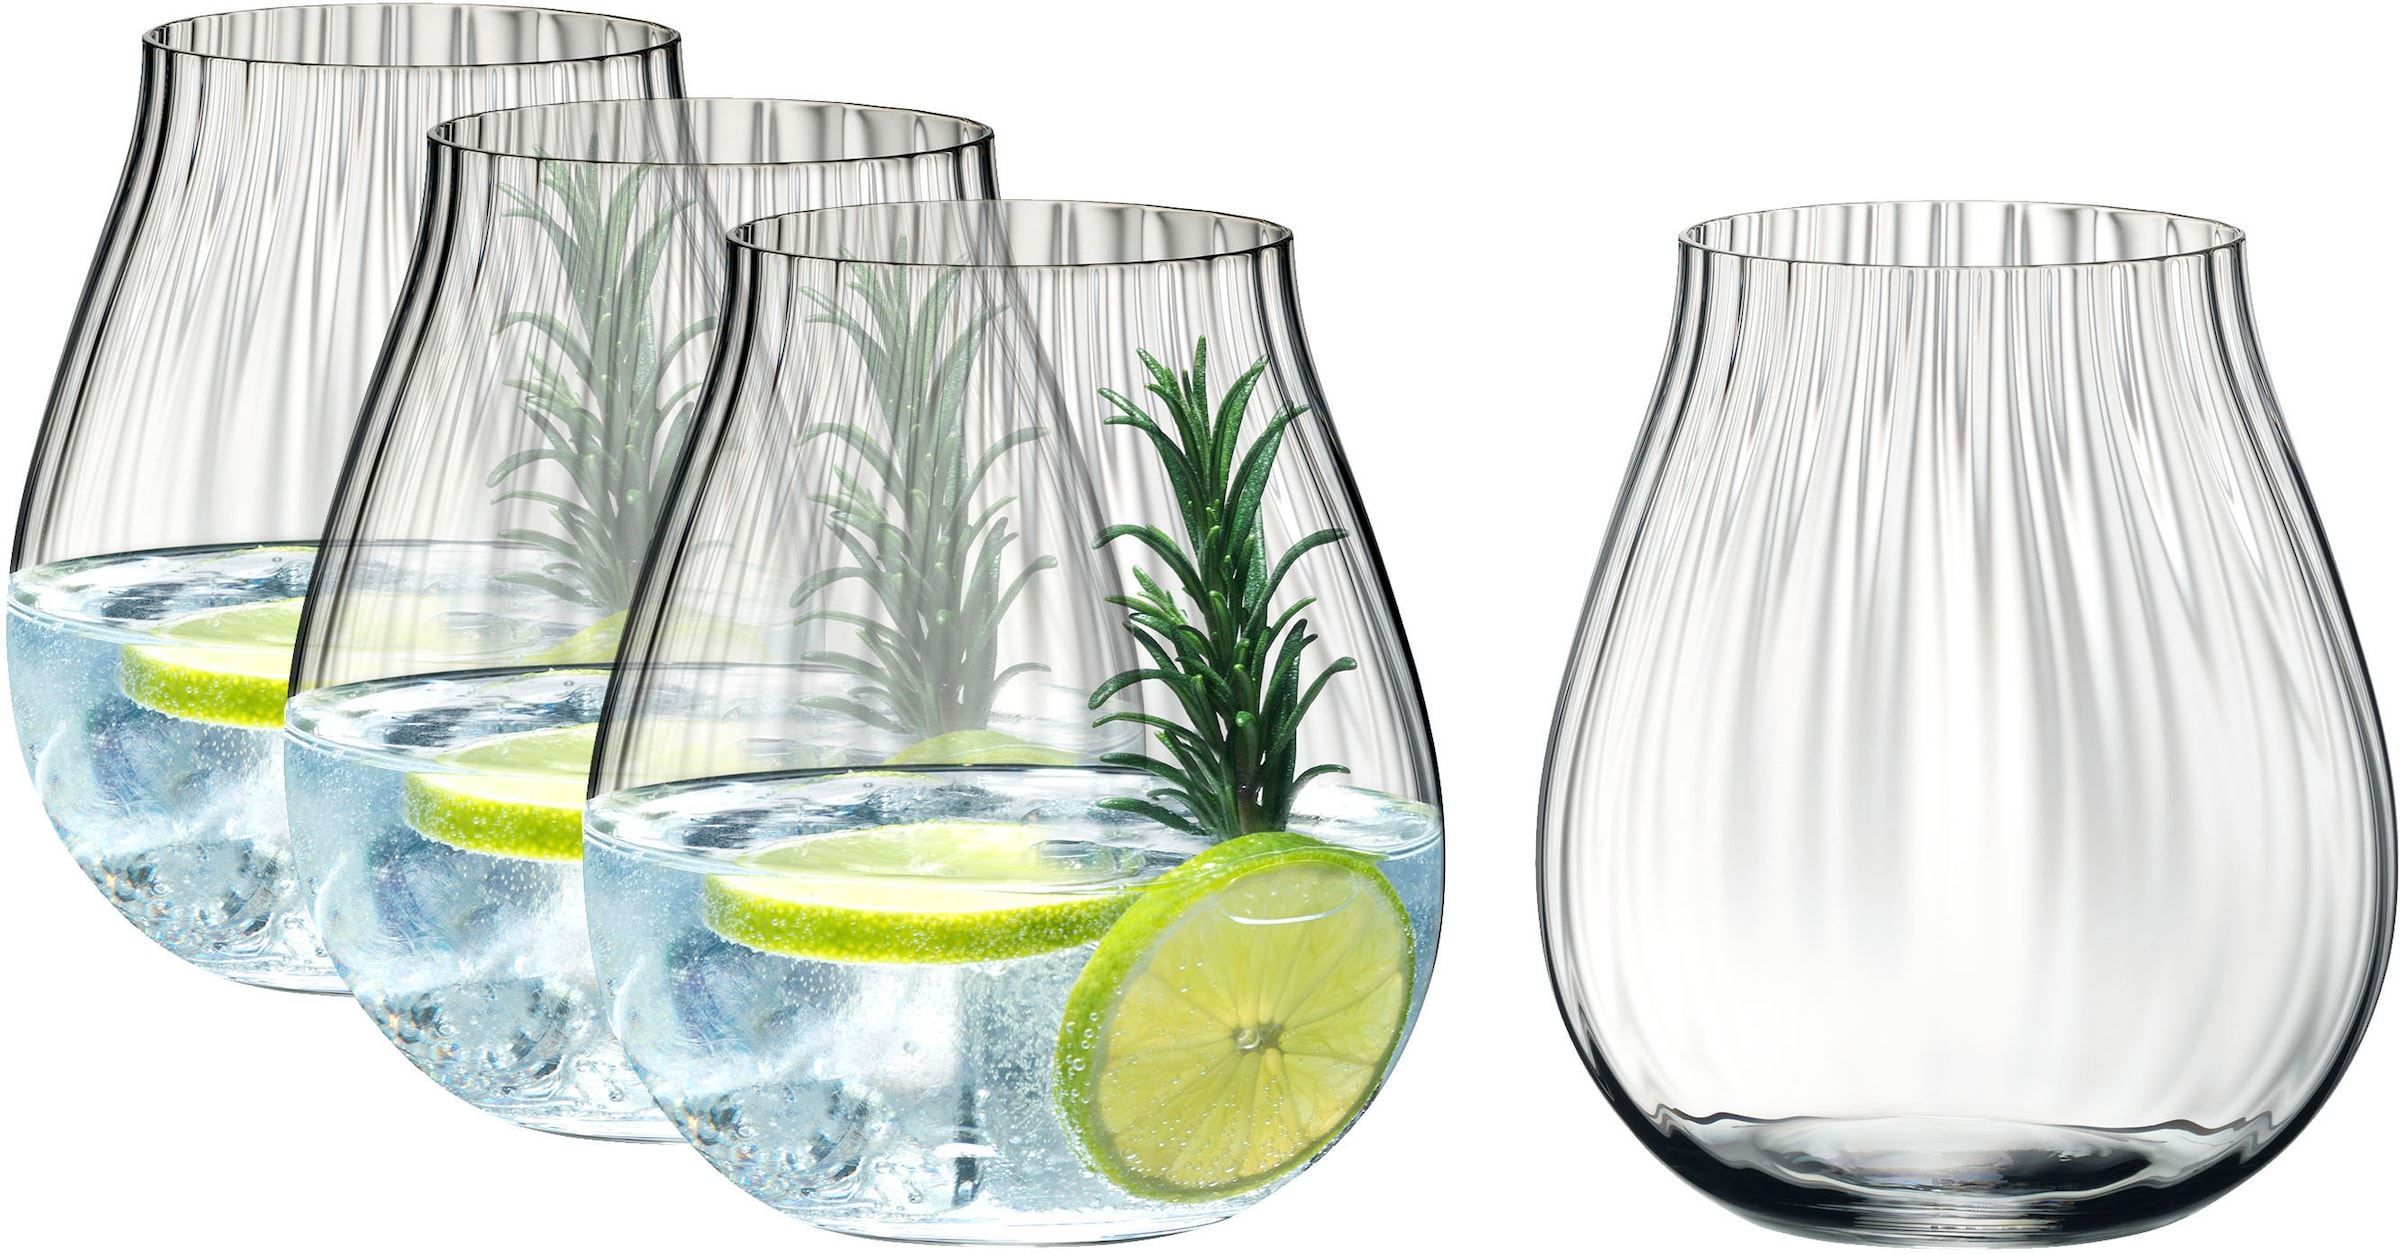 RIEDEL THE SPIRIT GLASS COMPANY Cocktailglas »Mixing Sets«, (Set, 4 tlg., GIN SET OPTIC "O"), Made in Germany, 765 ml, 4-teilig